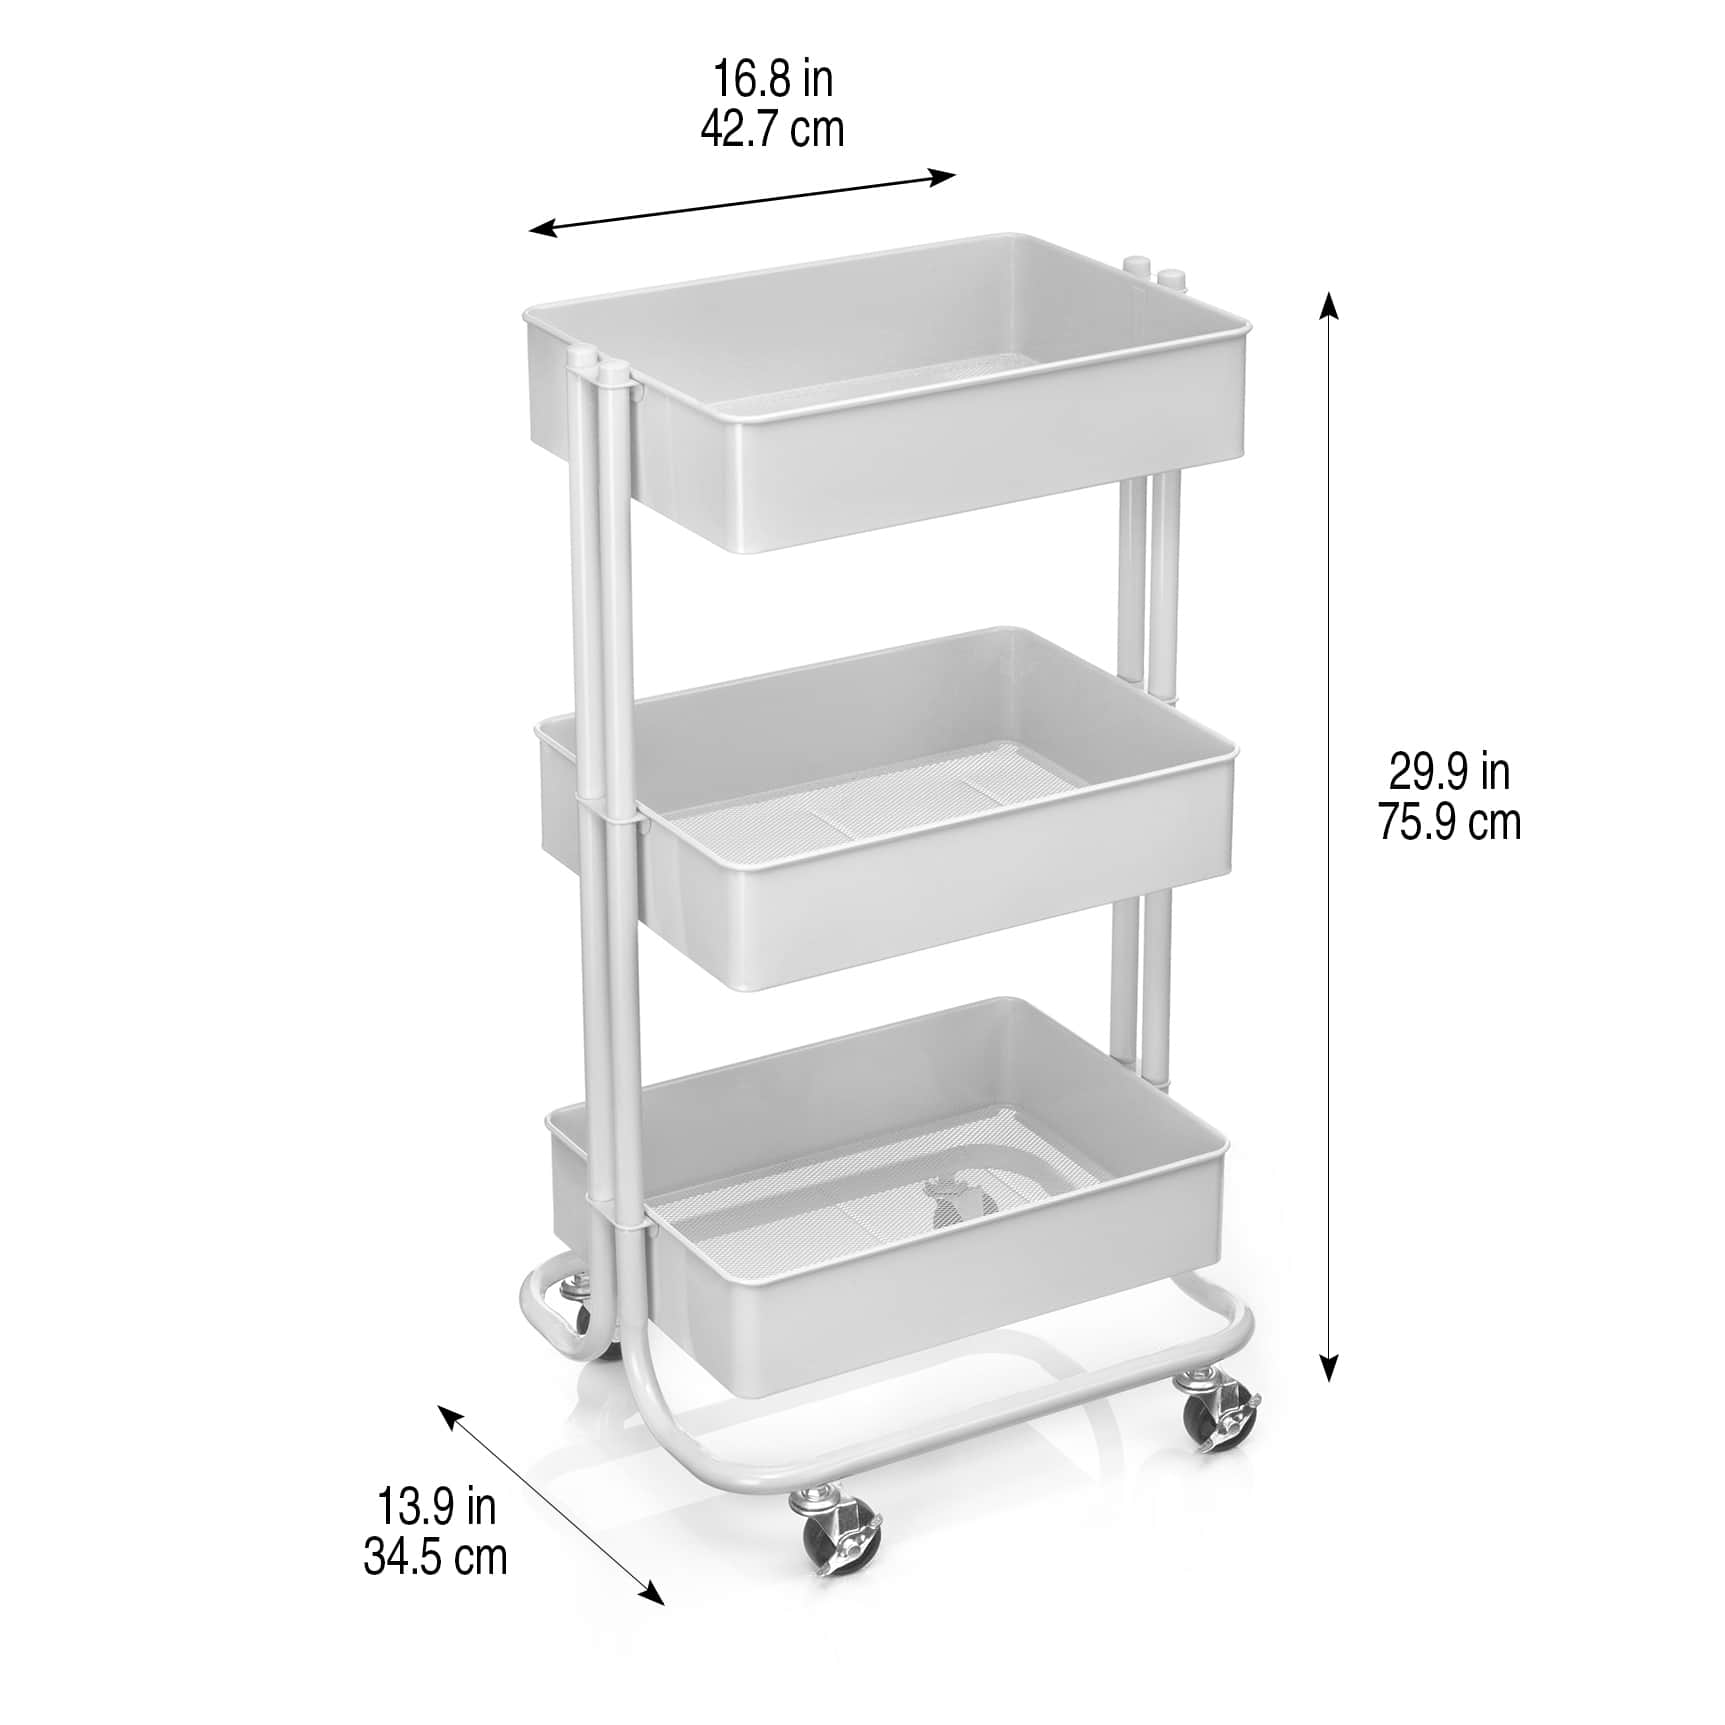 Basics 3-Tier Rolling Utility or Kitchen Cart White